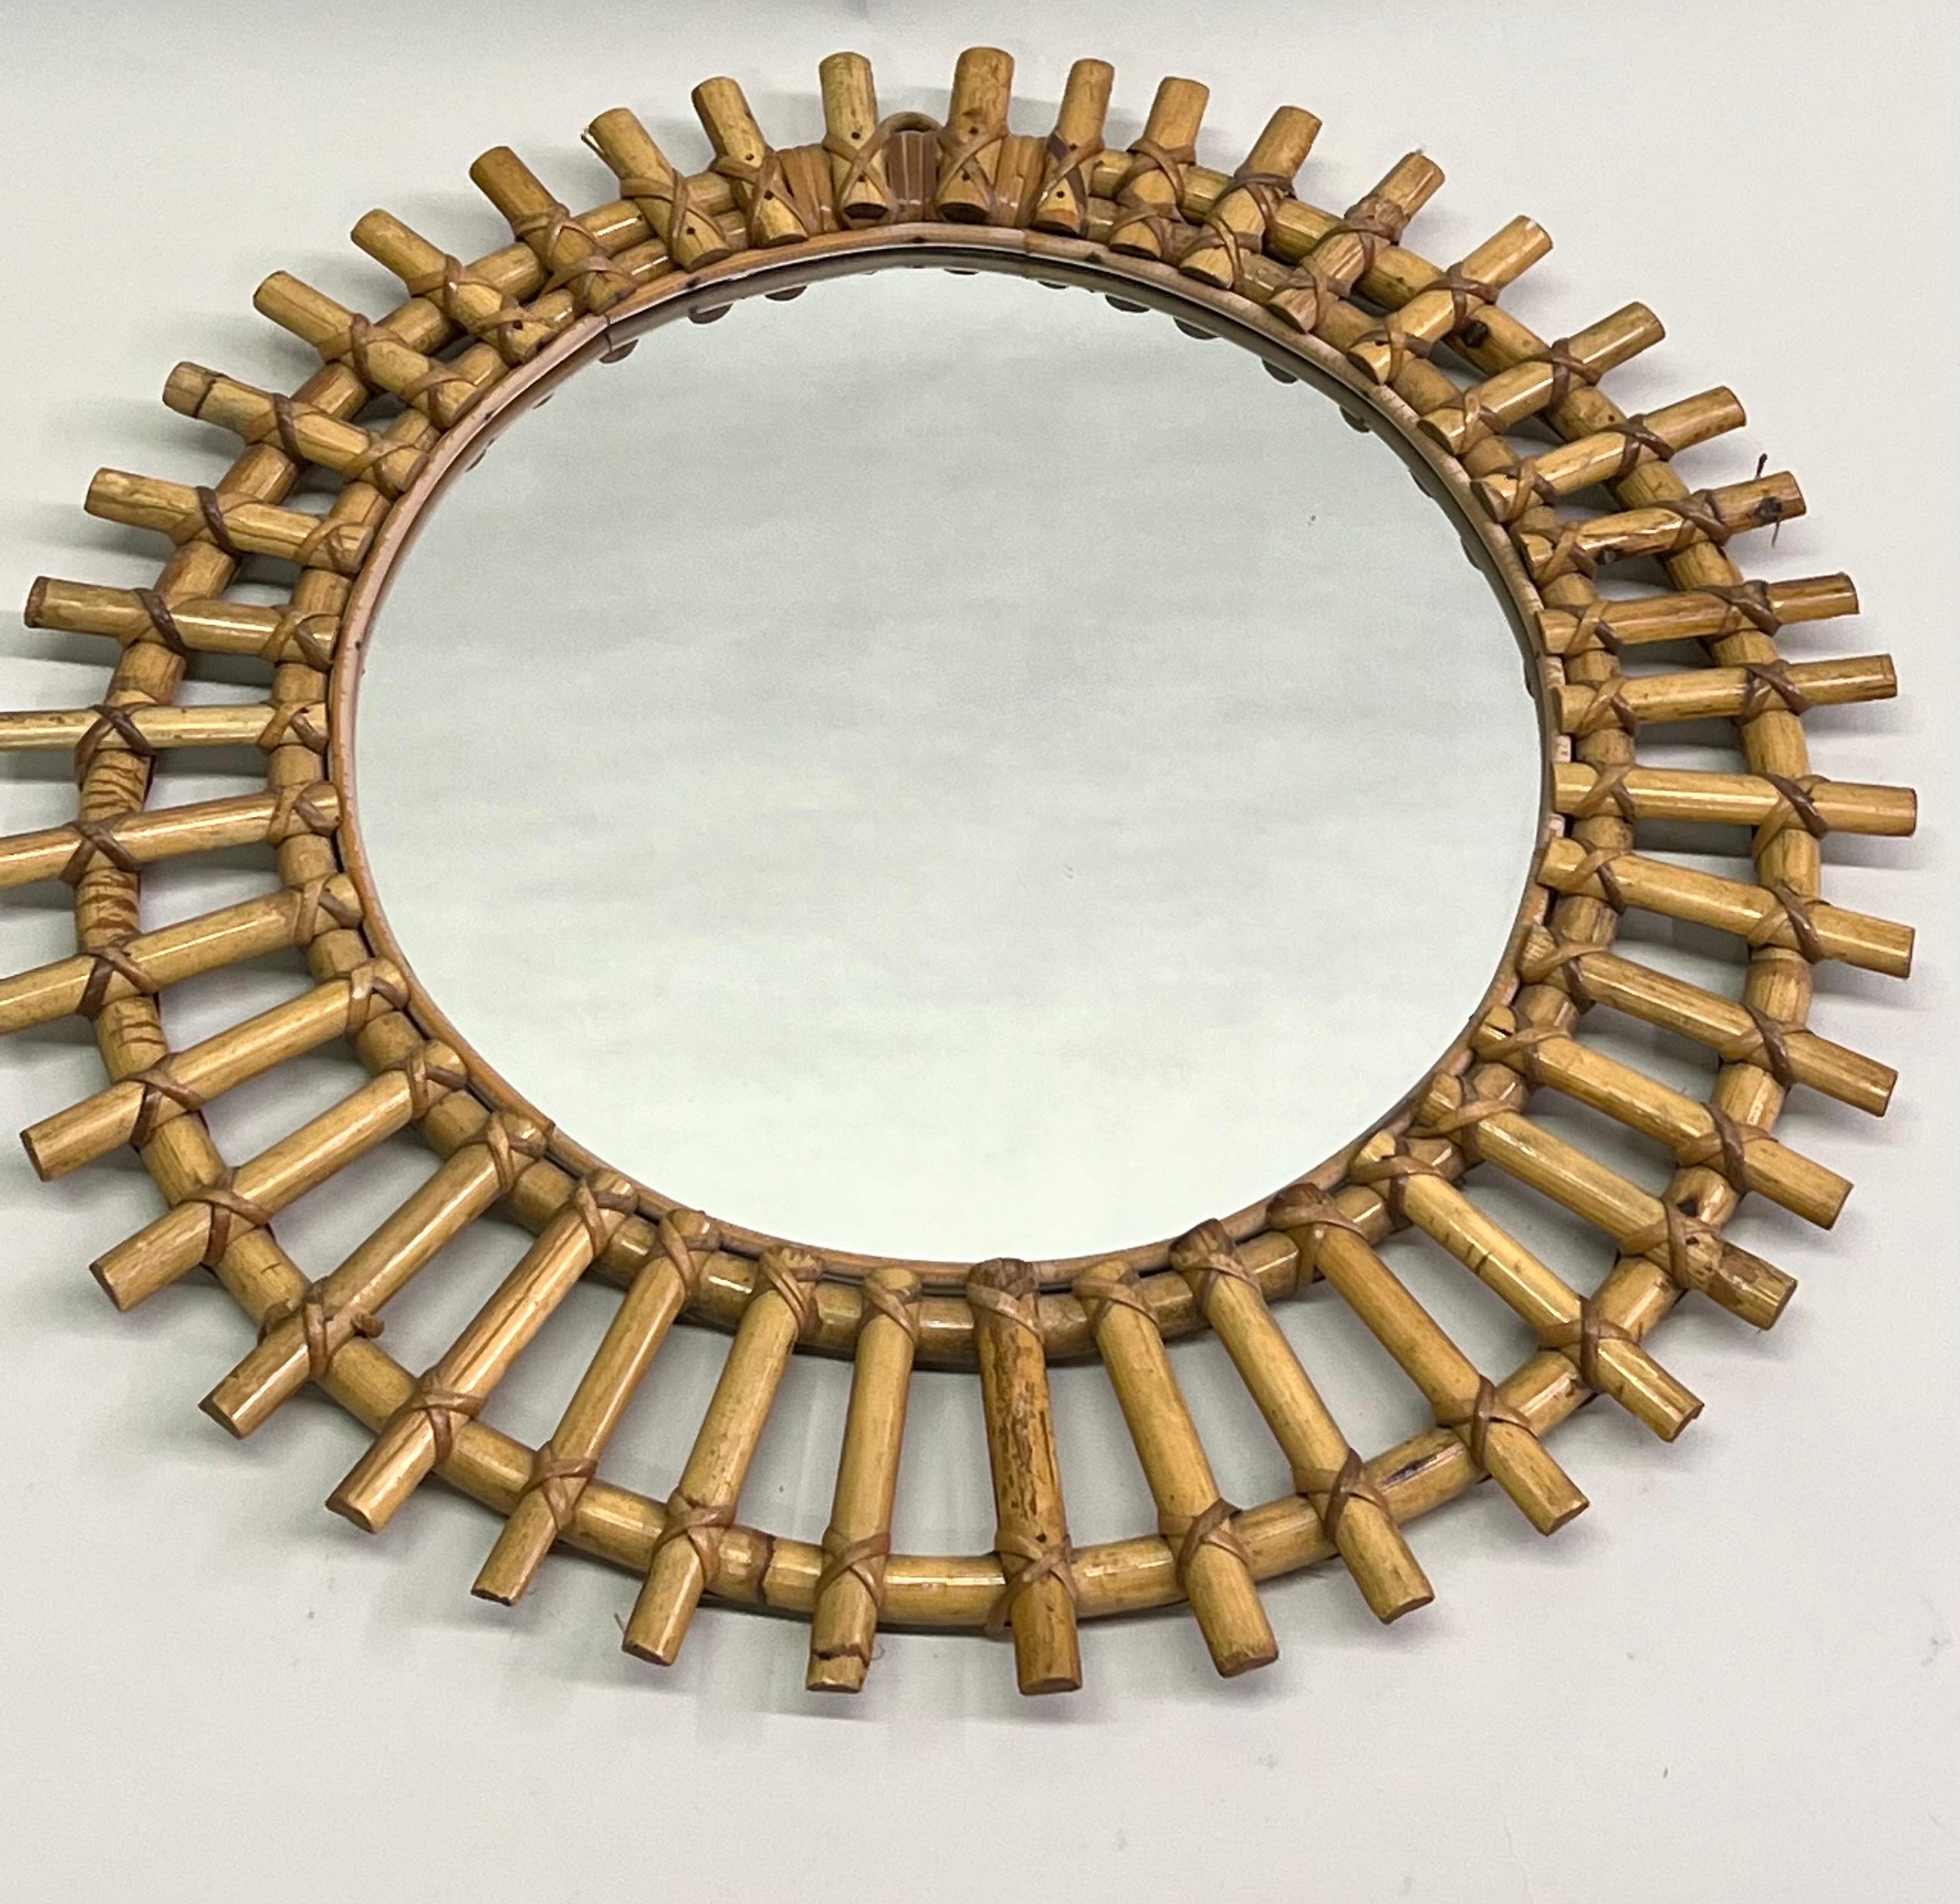 An elegant French Midcentury Modern Mirror in Bamboo and Rattan. The wall mirror has a rare Crescent form and features rattan sunbursts radiating radiating from the central mirror plate. The piece expresses the Modern Neoclassical aesthetic with its